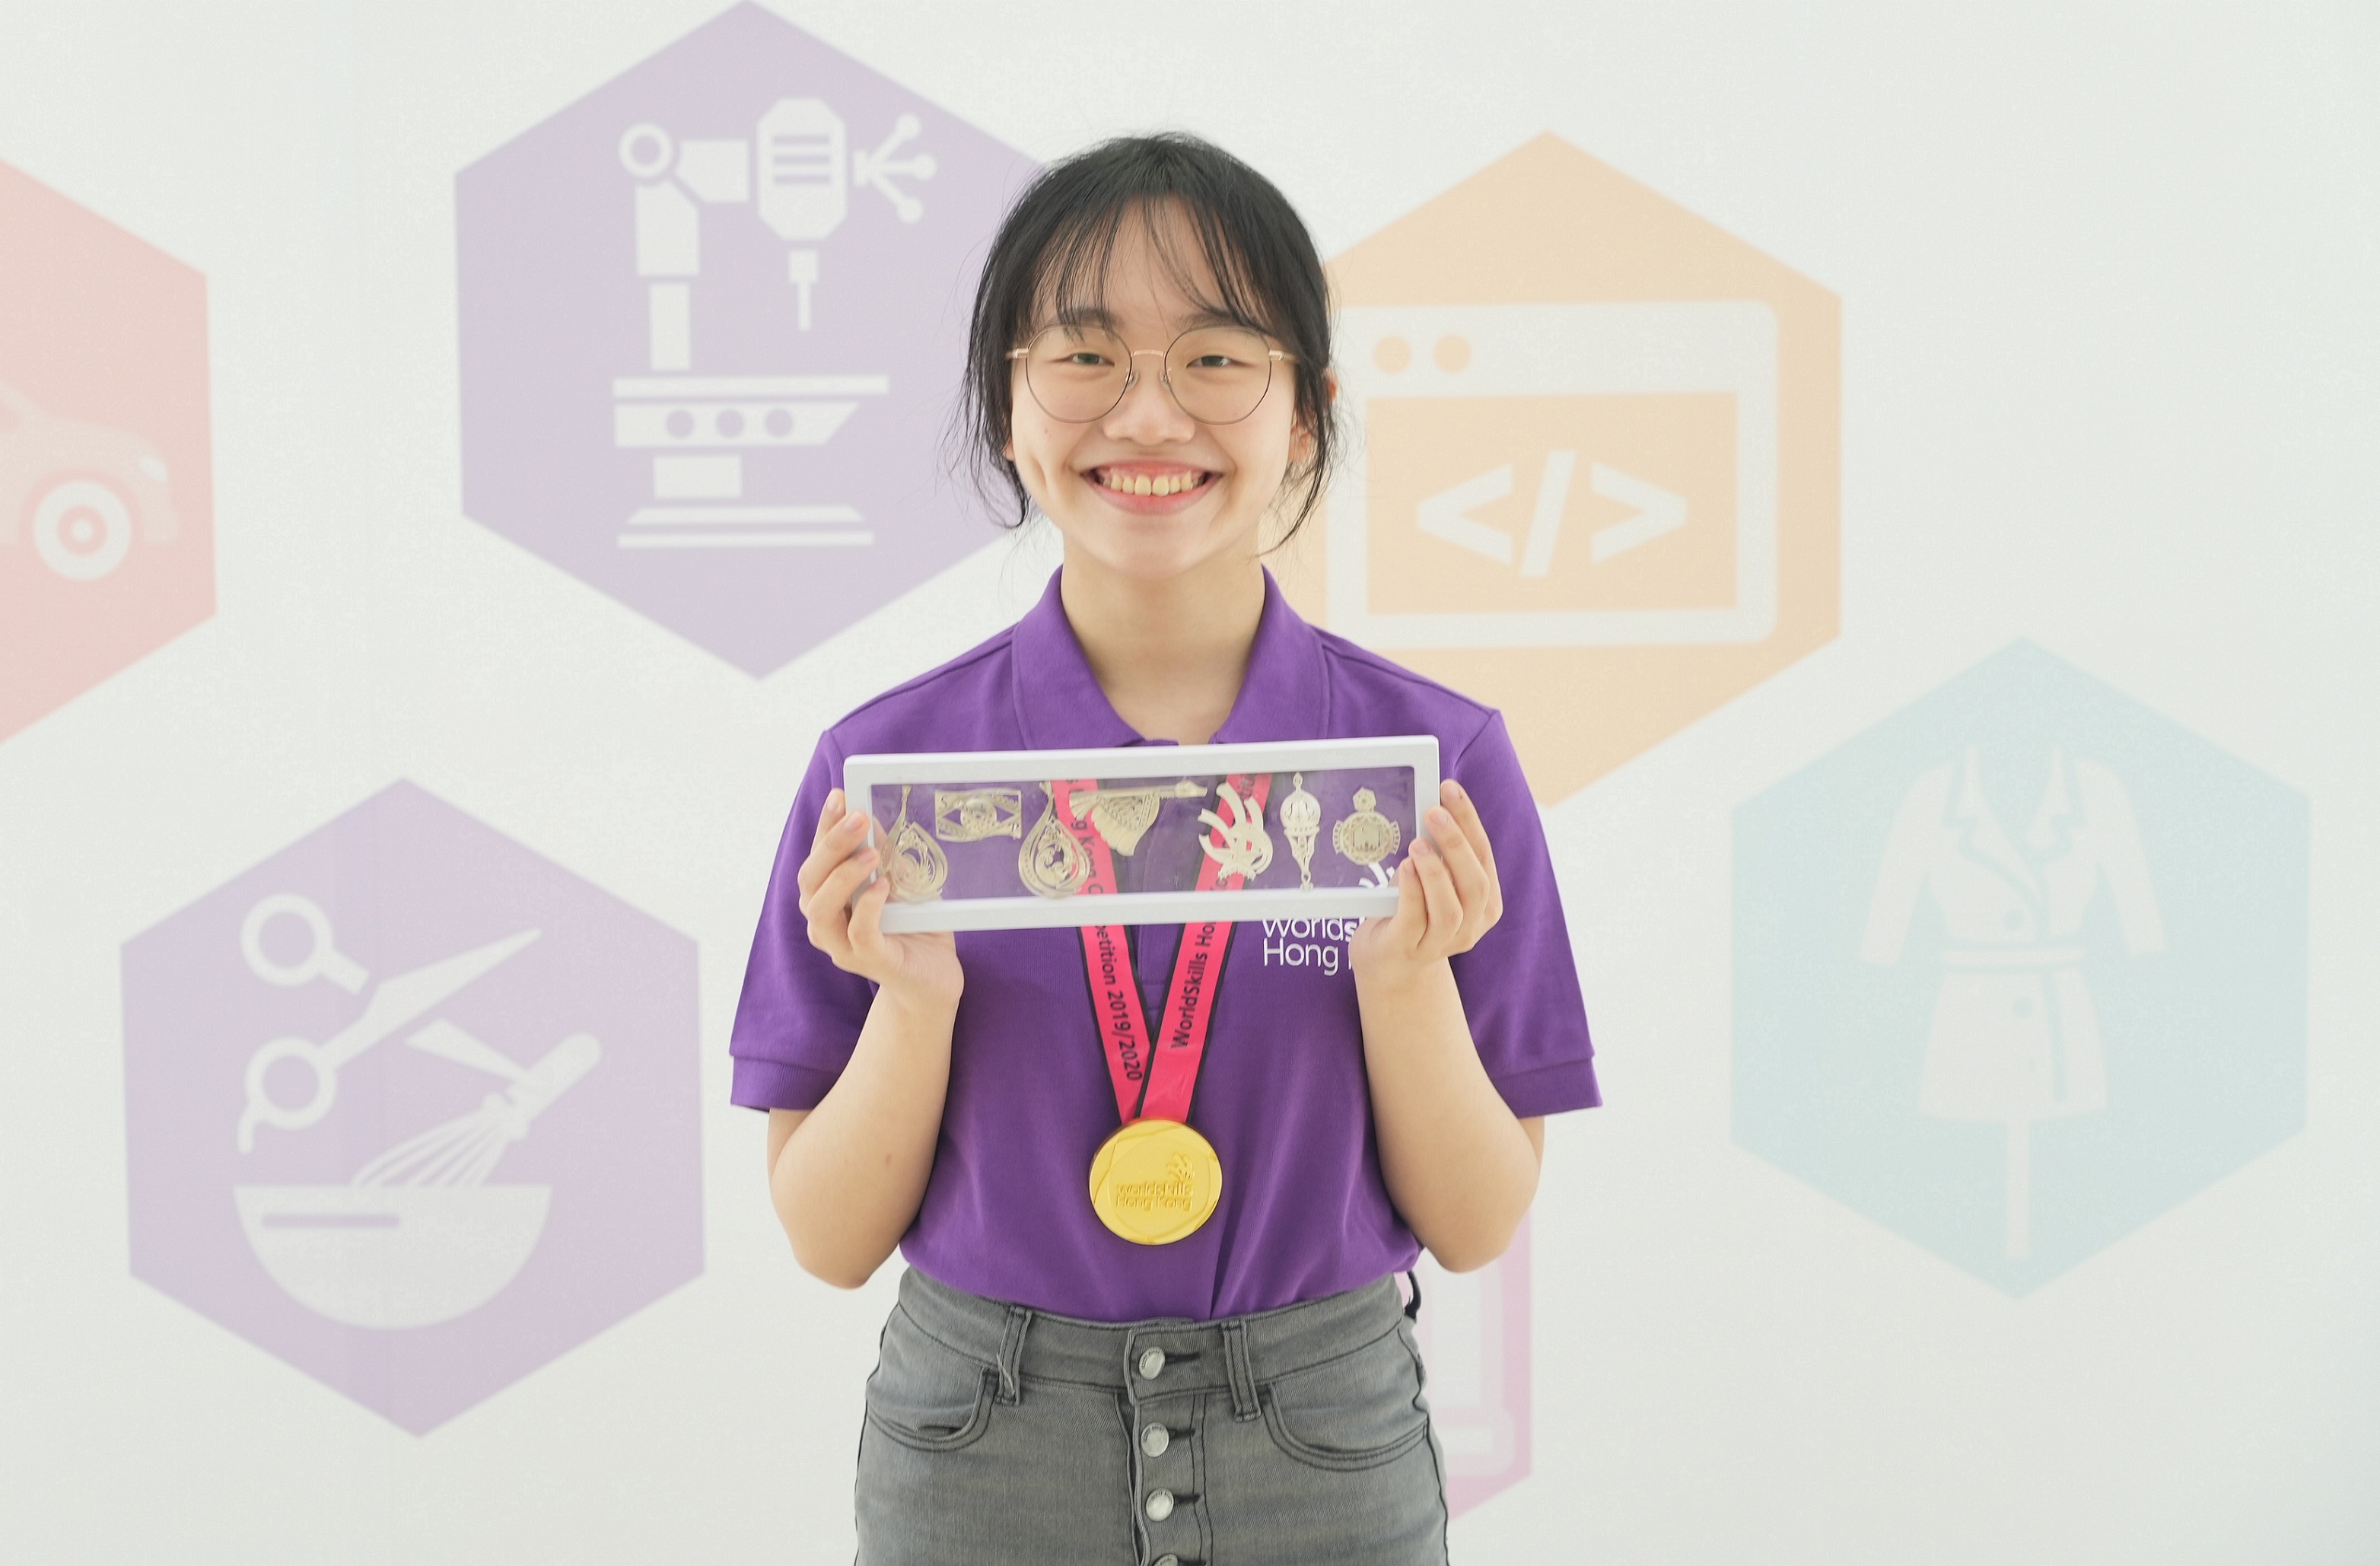 Young skilled talent recognised in WorldSkills Hong Kong Competition and gearing up for WorldSkills Shanghai 2022